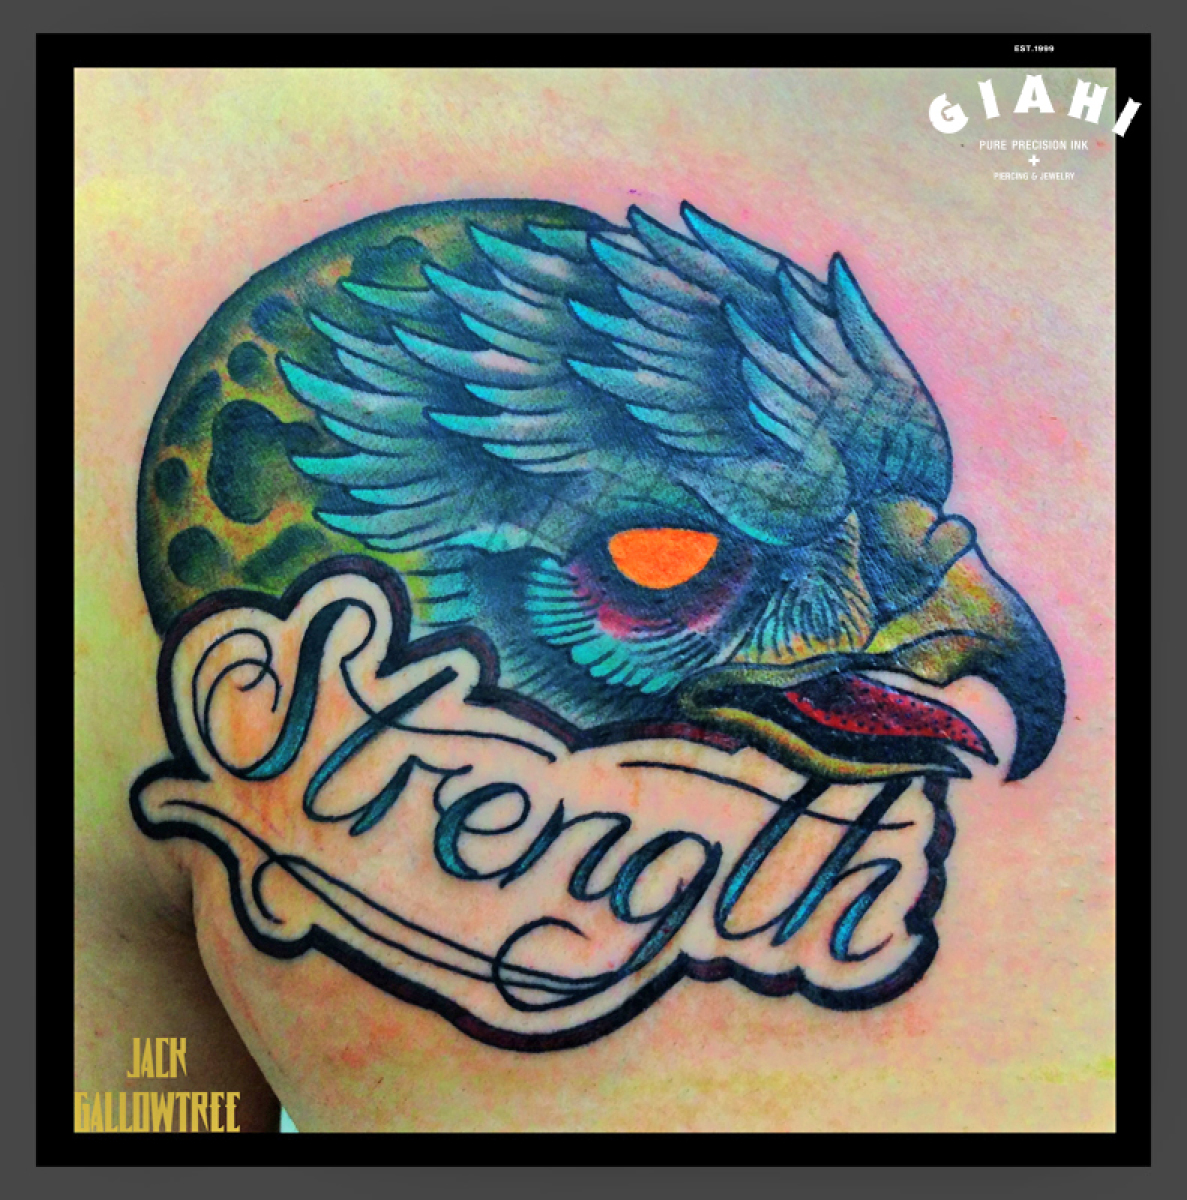 Moon Eagle Strenth Lettering tattoo by Jack Gallowtree